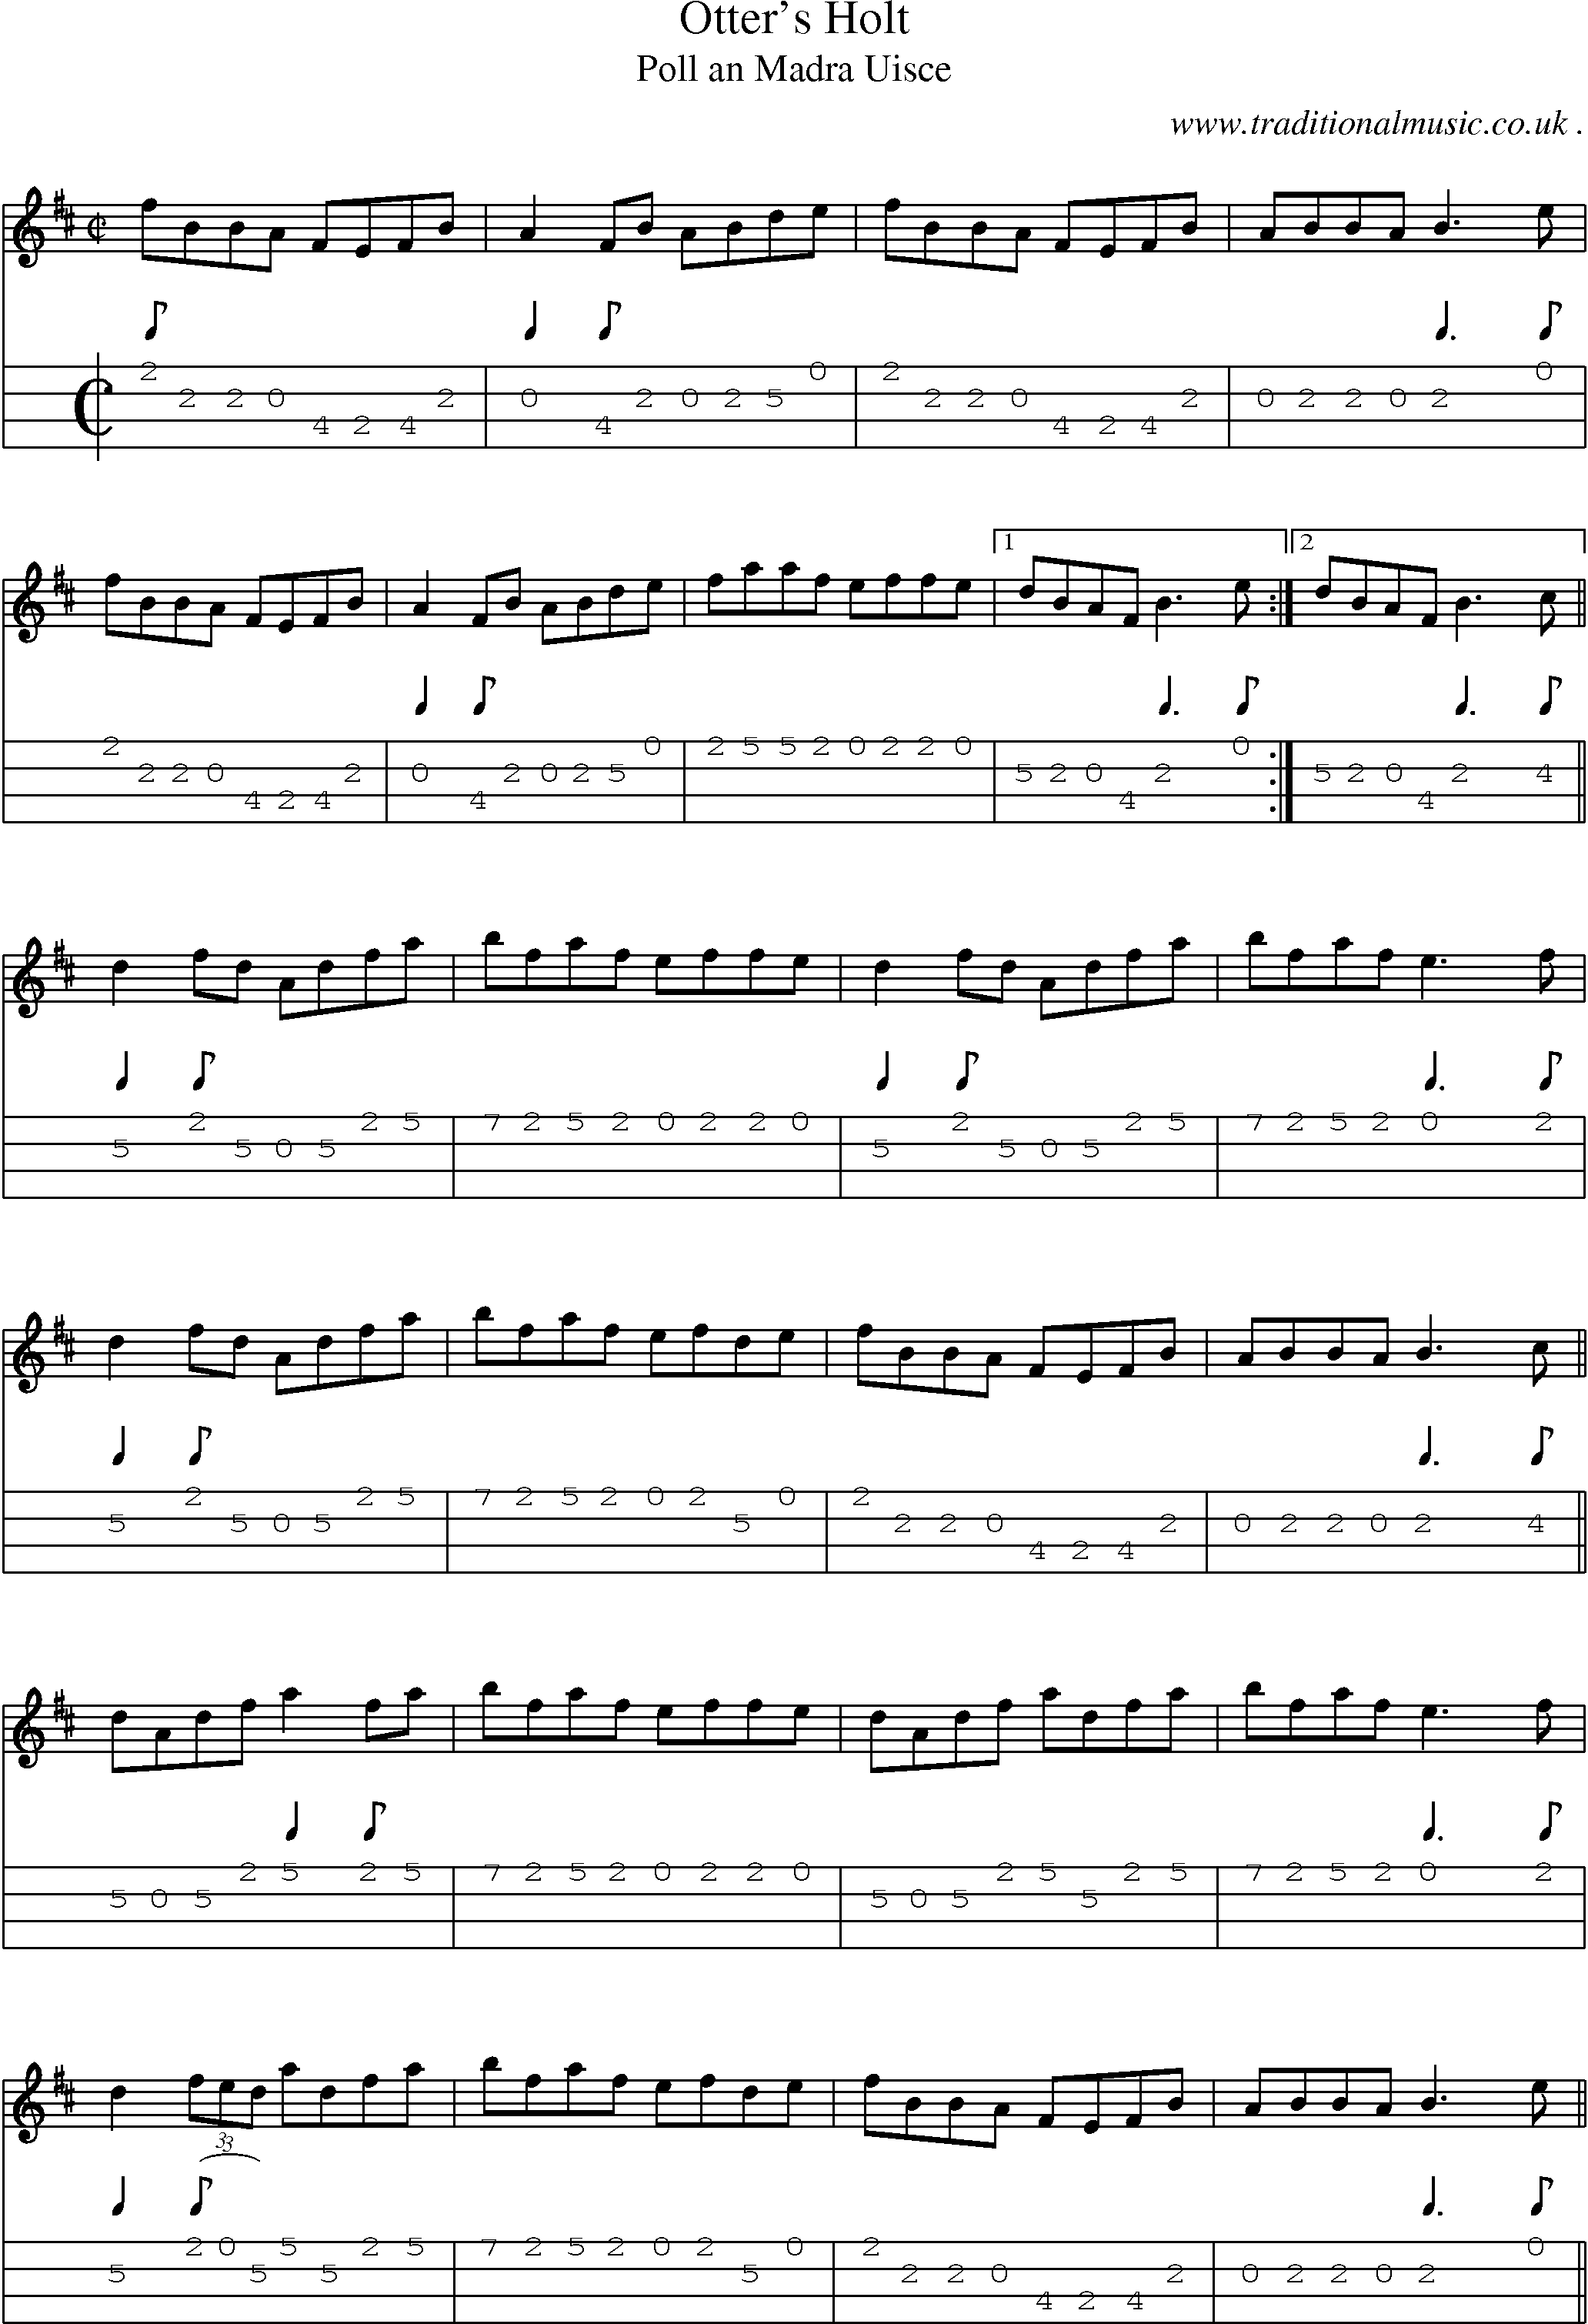 Sheet-Music and Mandolin Tabs for Otters Holt